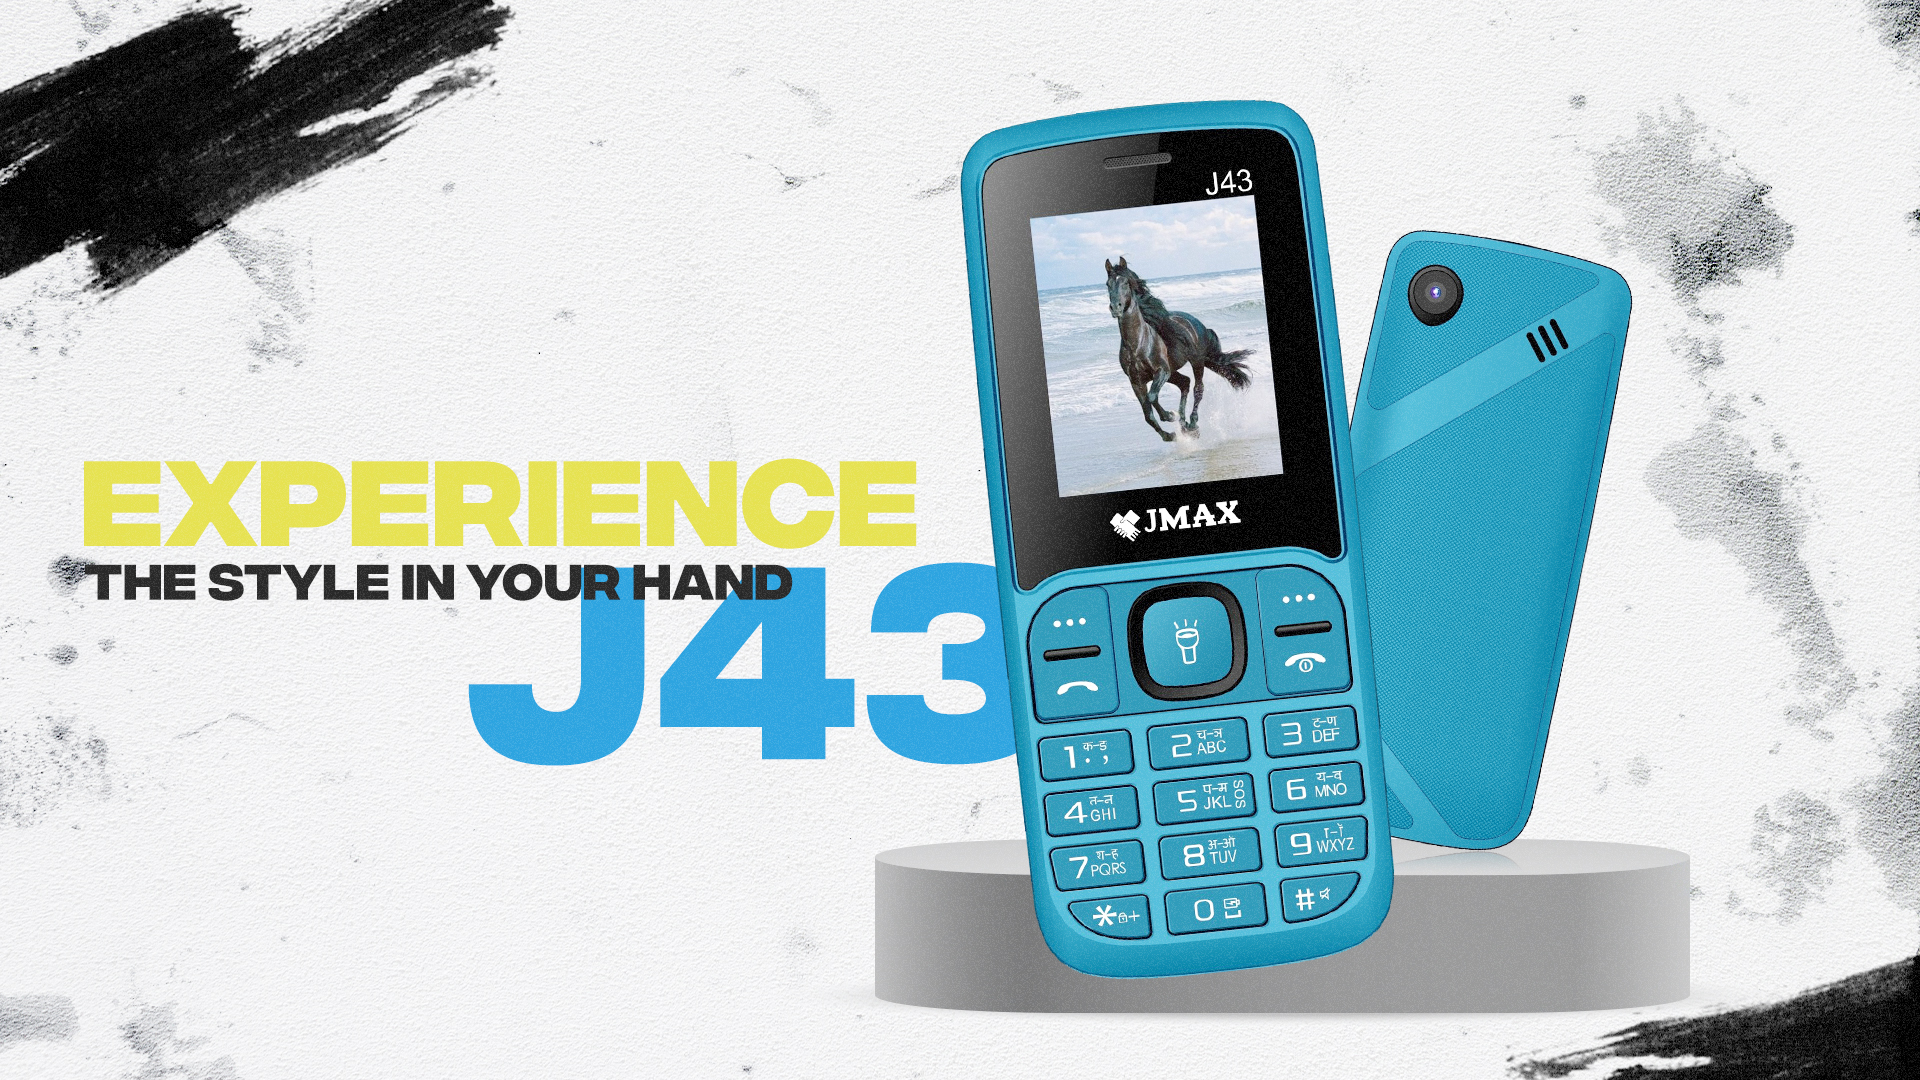 feature phone J34